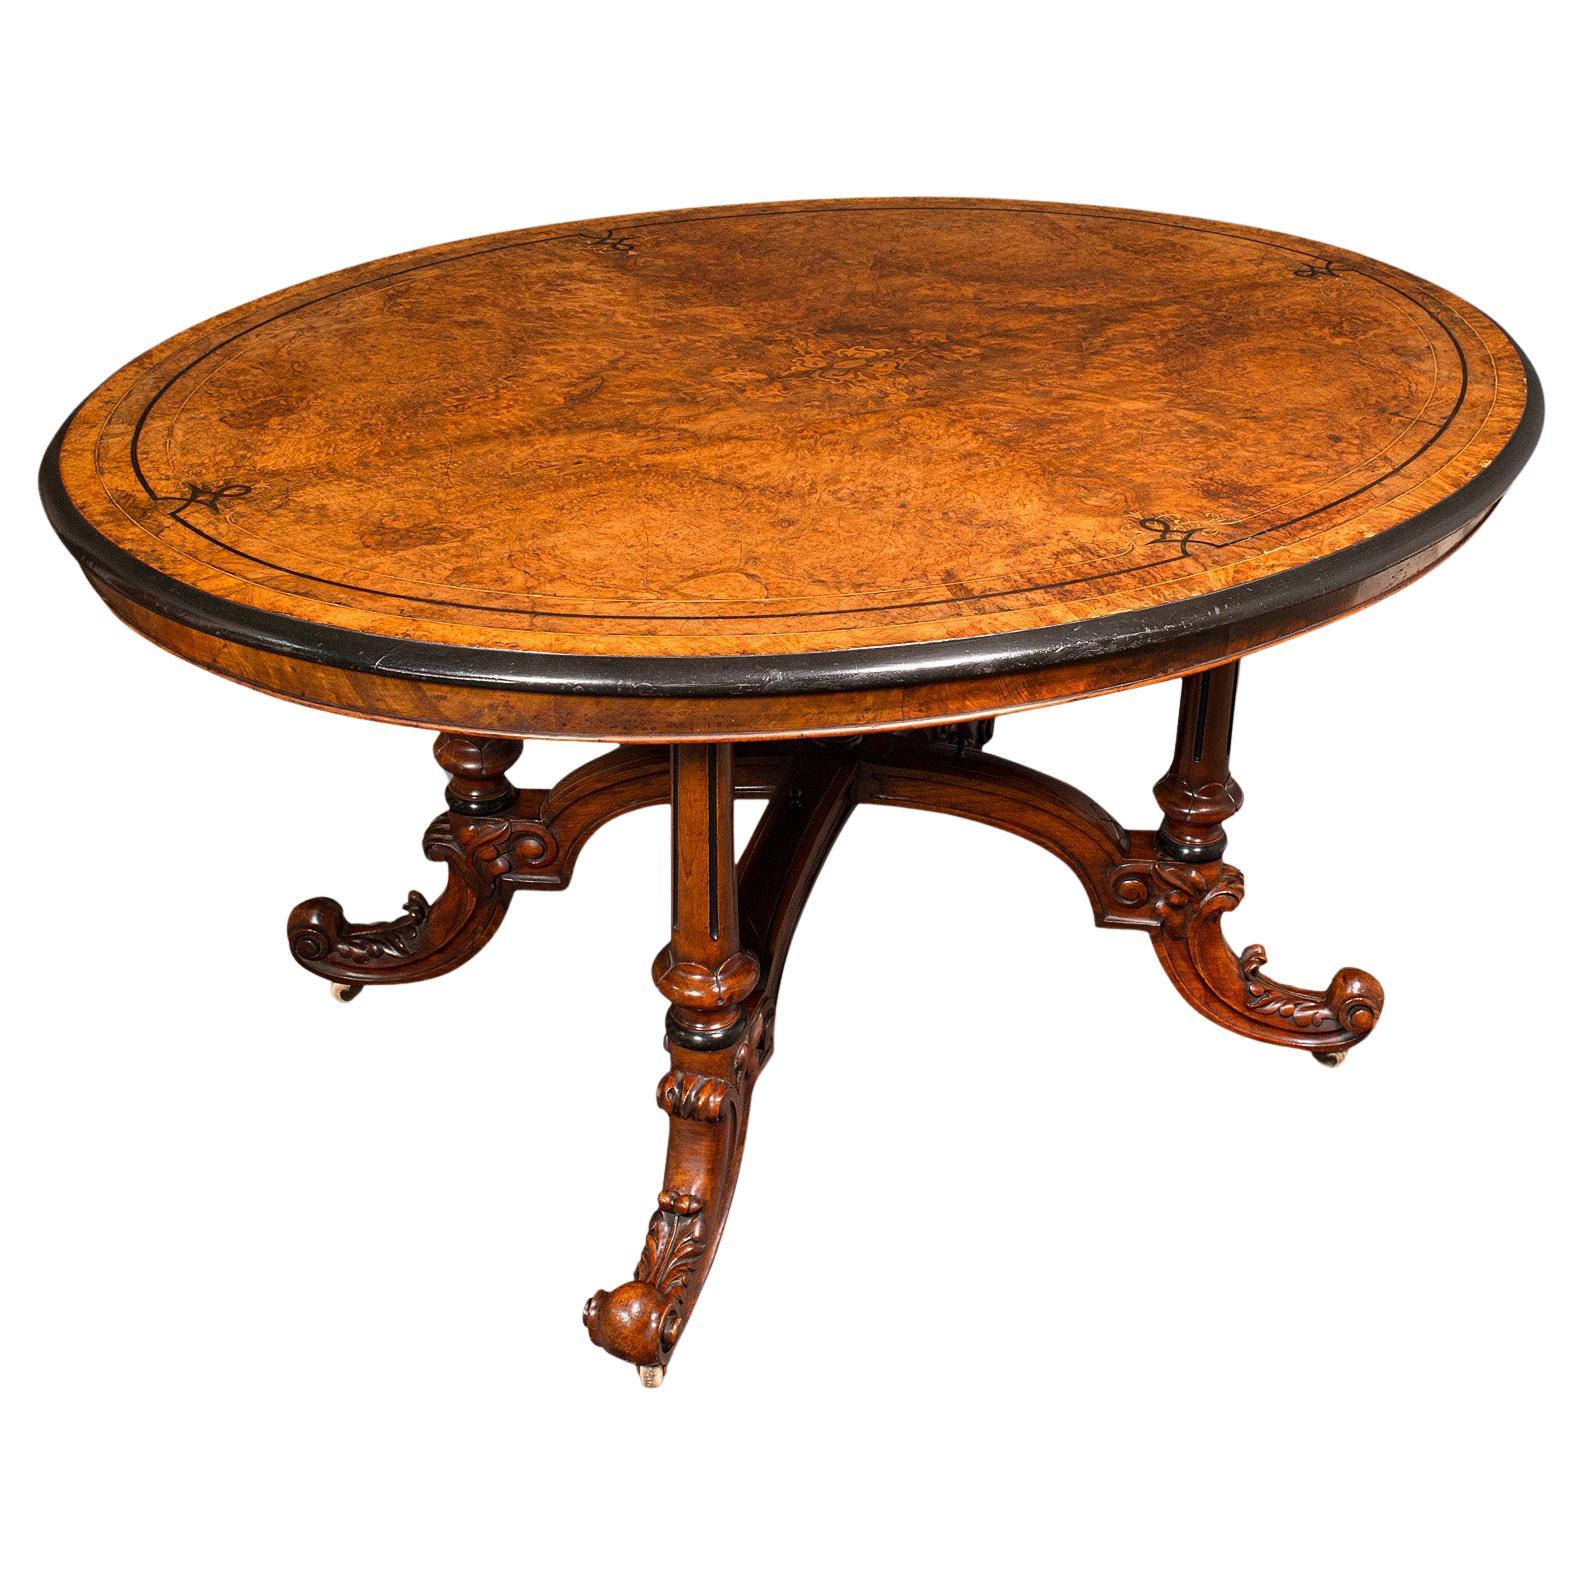 Antique Oval Looe Table, English, Walnut, 4 Seat, Centrepiece, Early Victorian For Sale